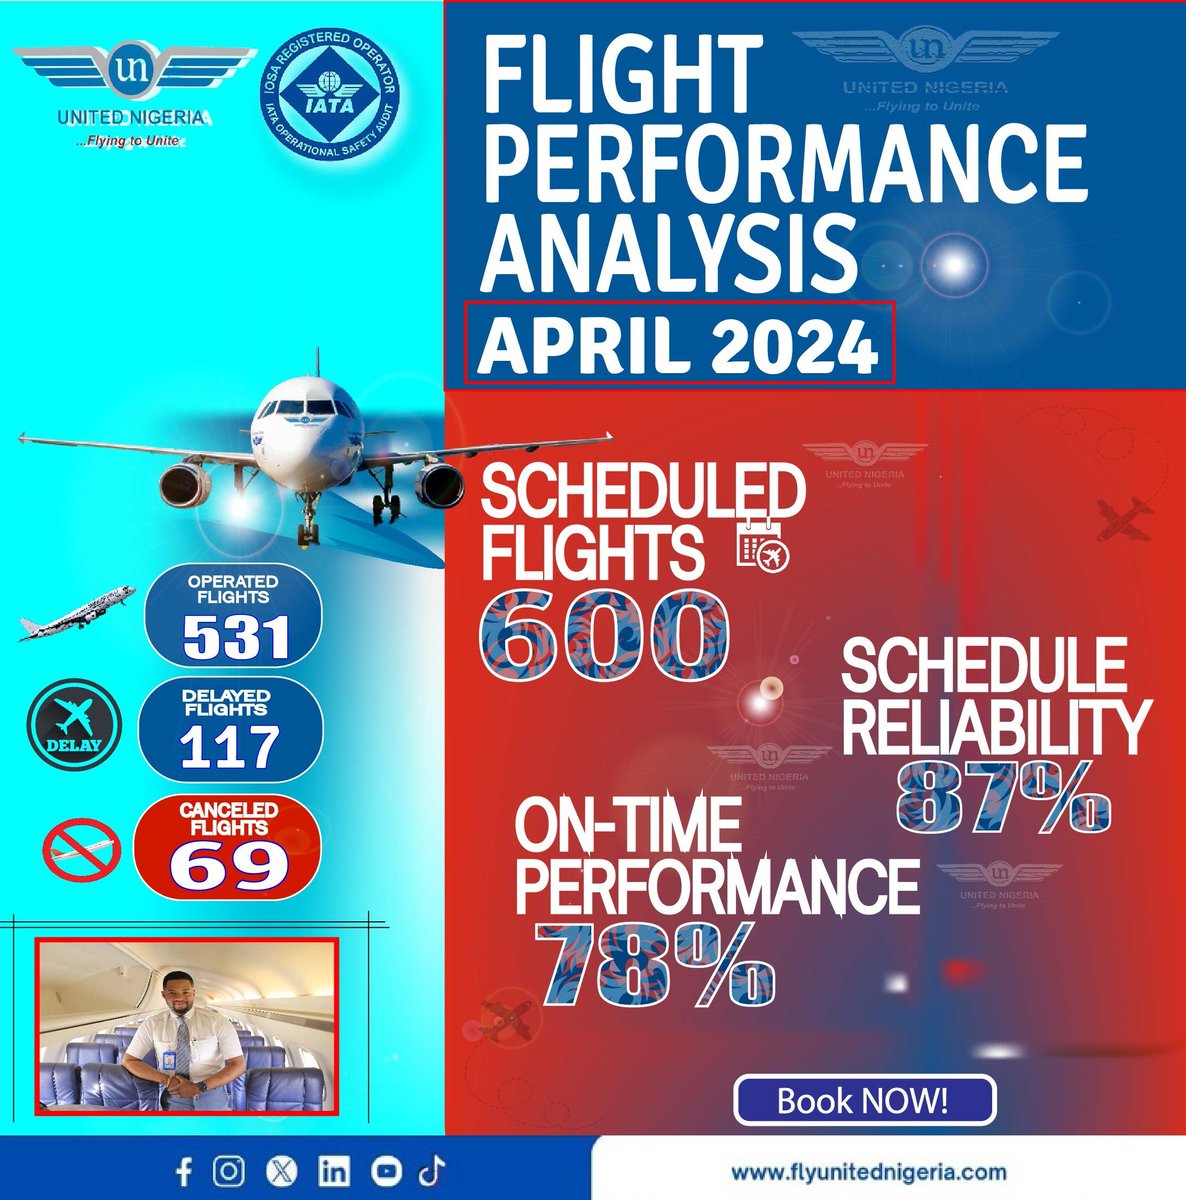 Flight Performance Report for April In alignment with our steadfast dedication to efficient and effective customer service values, transparency, and accountability, we present the performance report for April. Key Performance Indicators: - Schedule Reliability: Achieved 87% -…